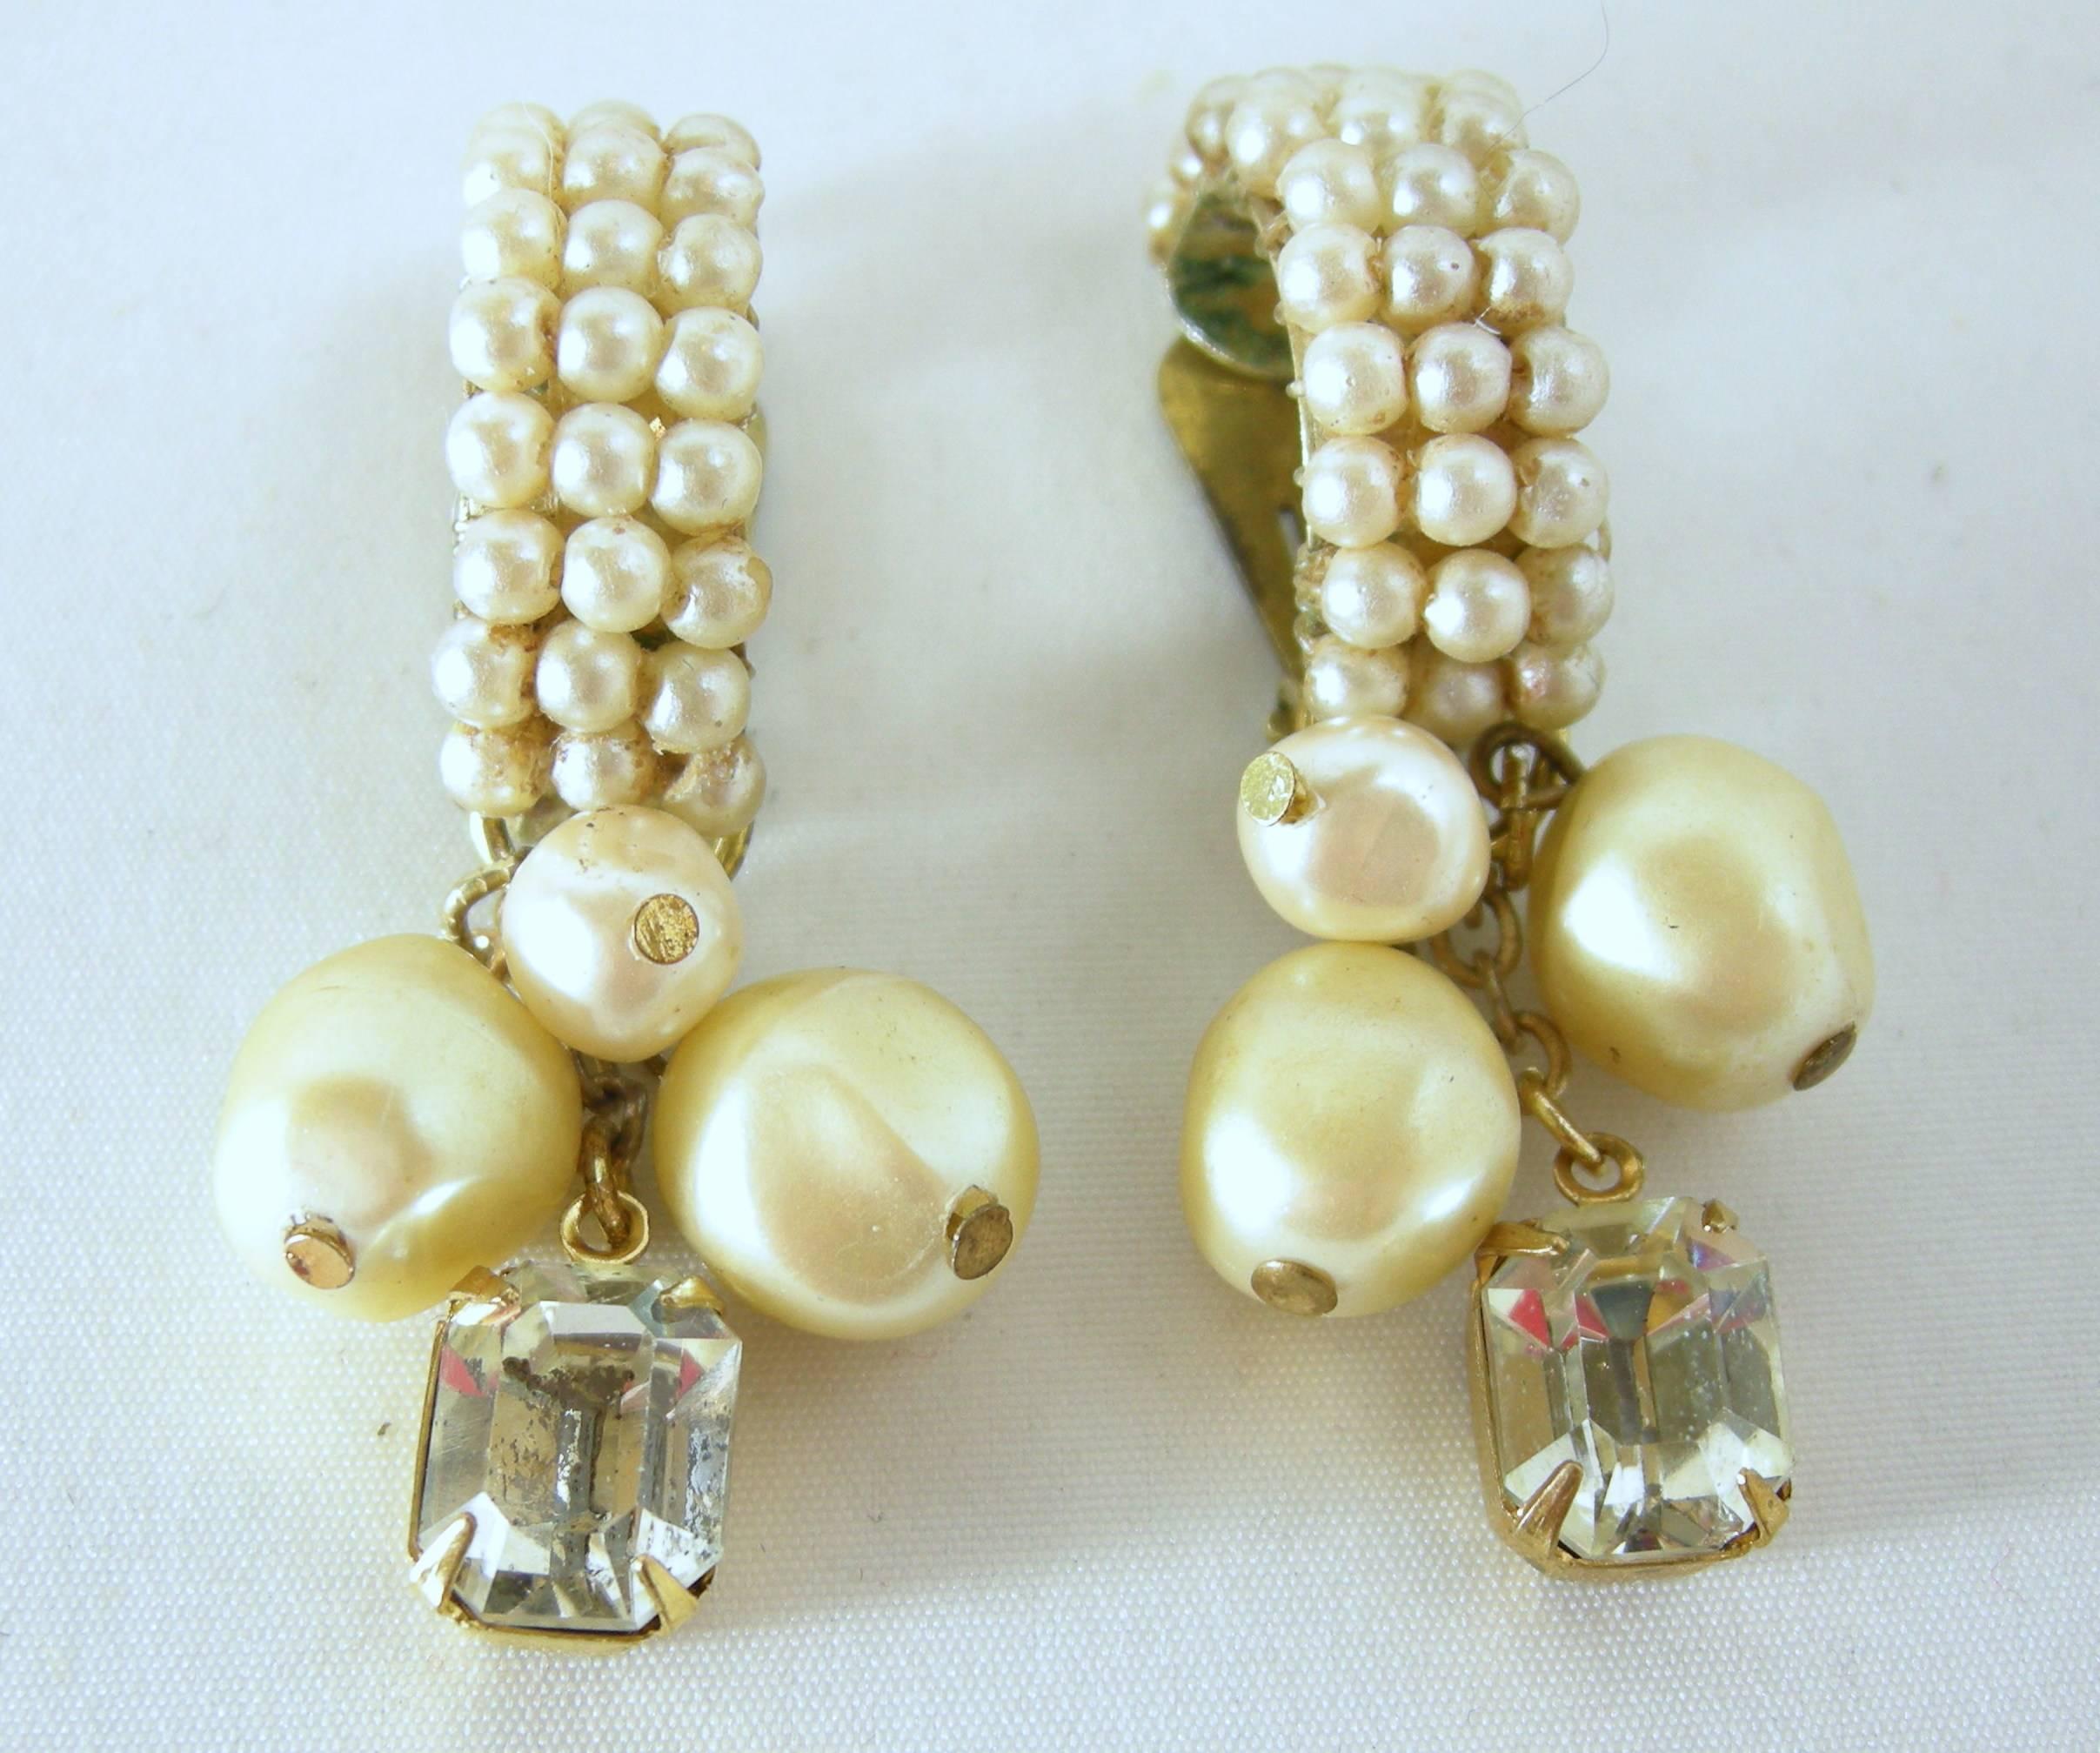 These shrimp shaped clip earrings are made with three rows of faux pearl seeds. It has three pearls that dangle and a large sized crystal. They are set in a gold tone setting and measure 2” x 3/8”. They are signed “DeMario” and in excellent